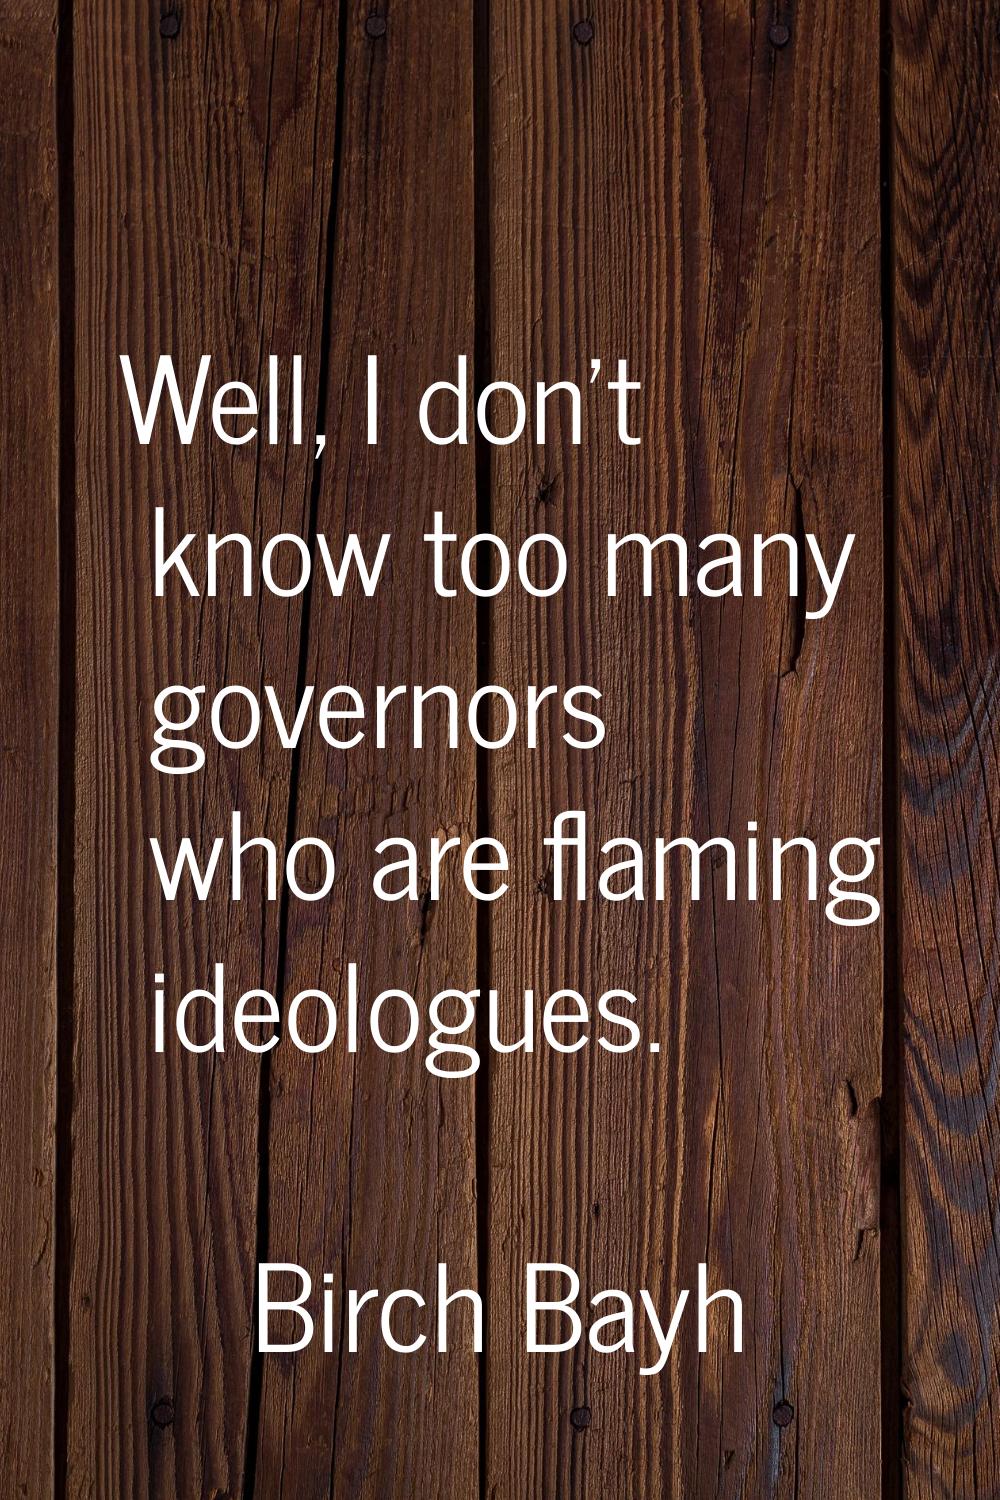 Well, I don't know too many governors who are flaming ideologues.